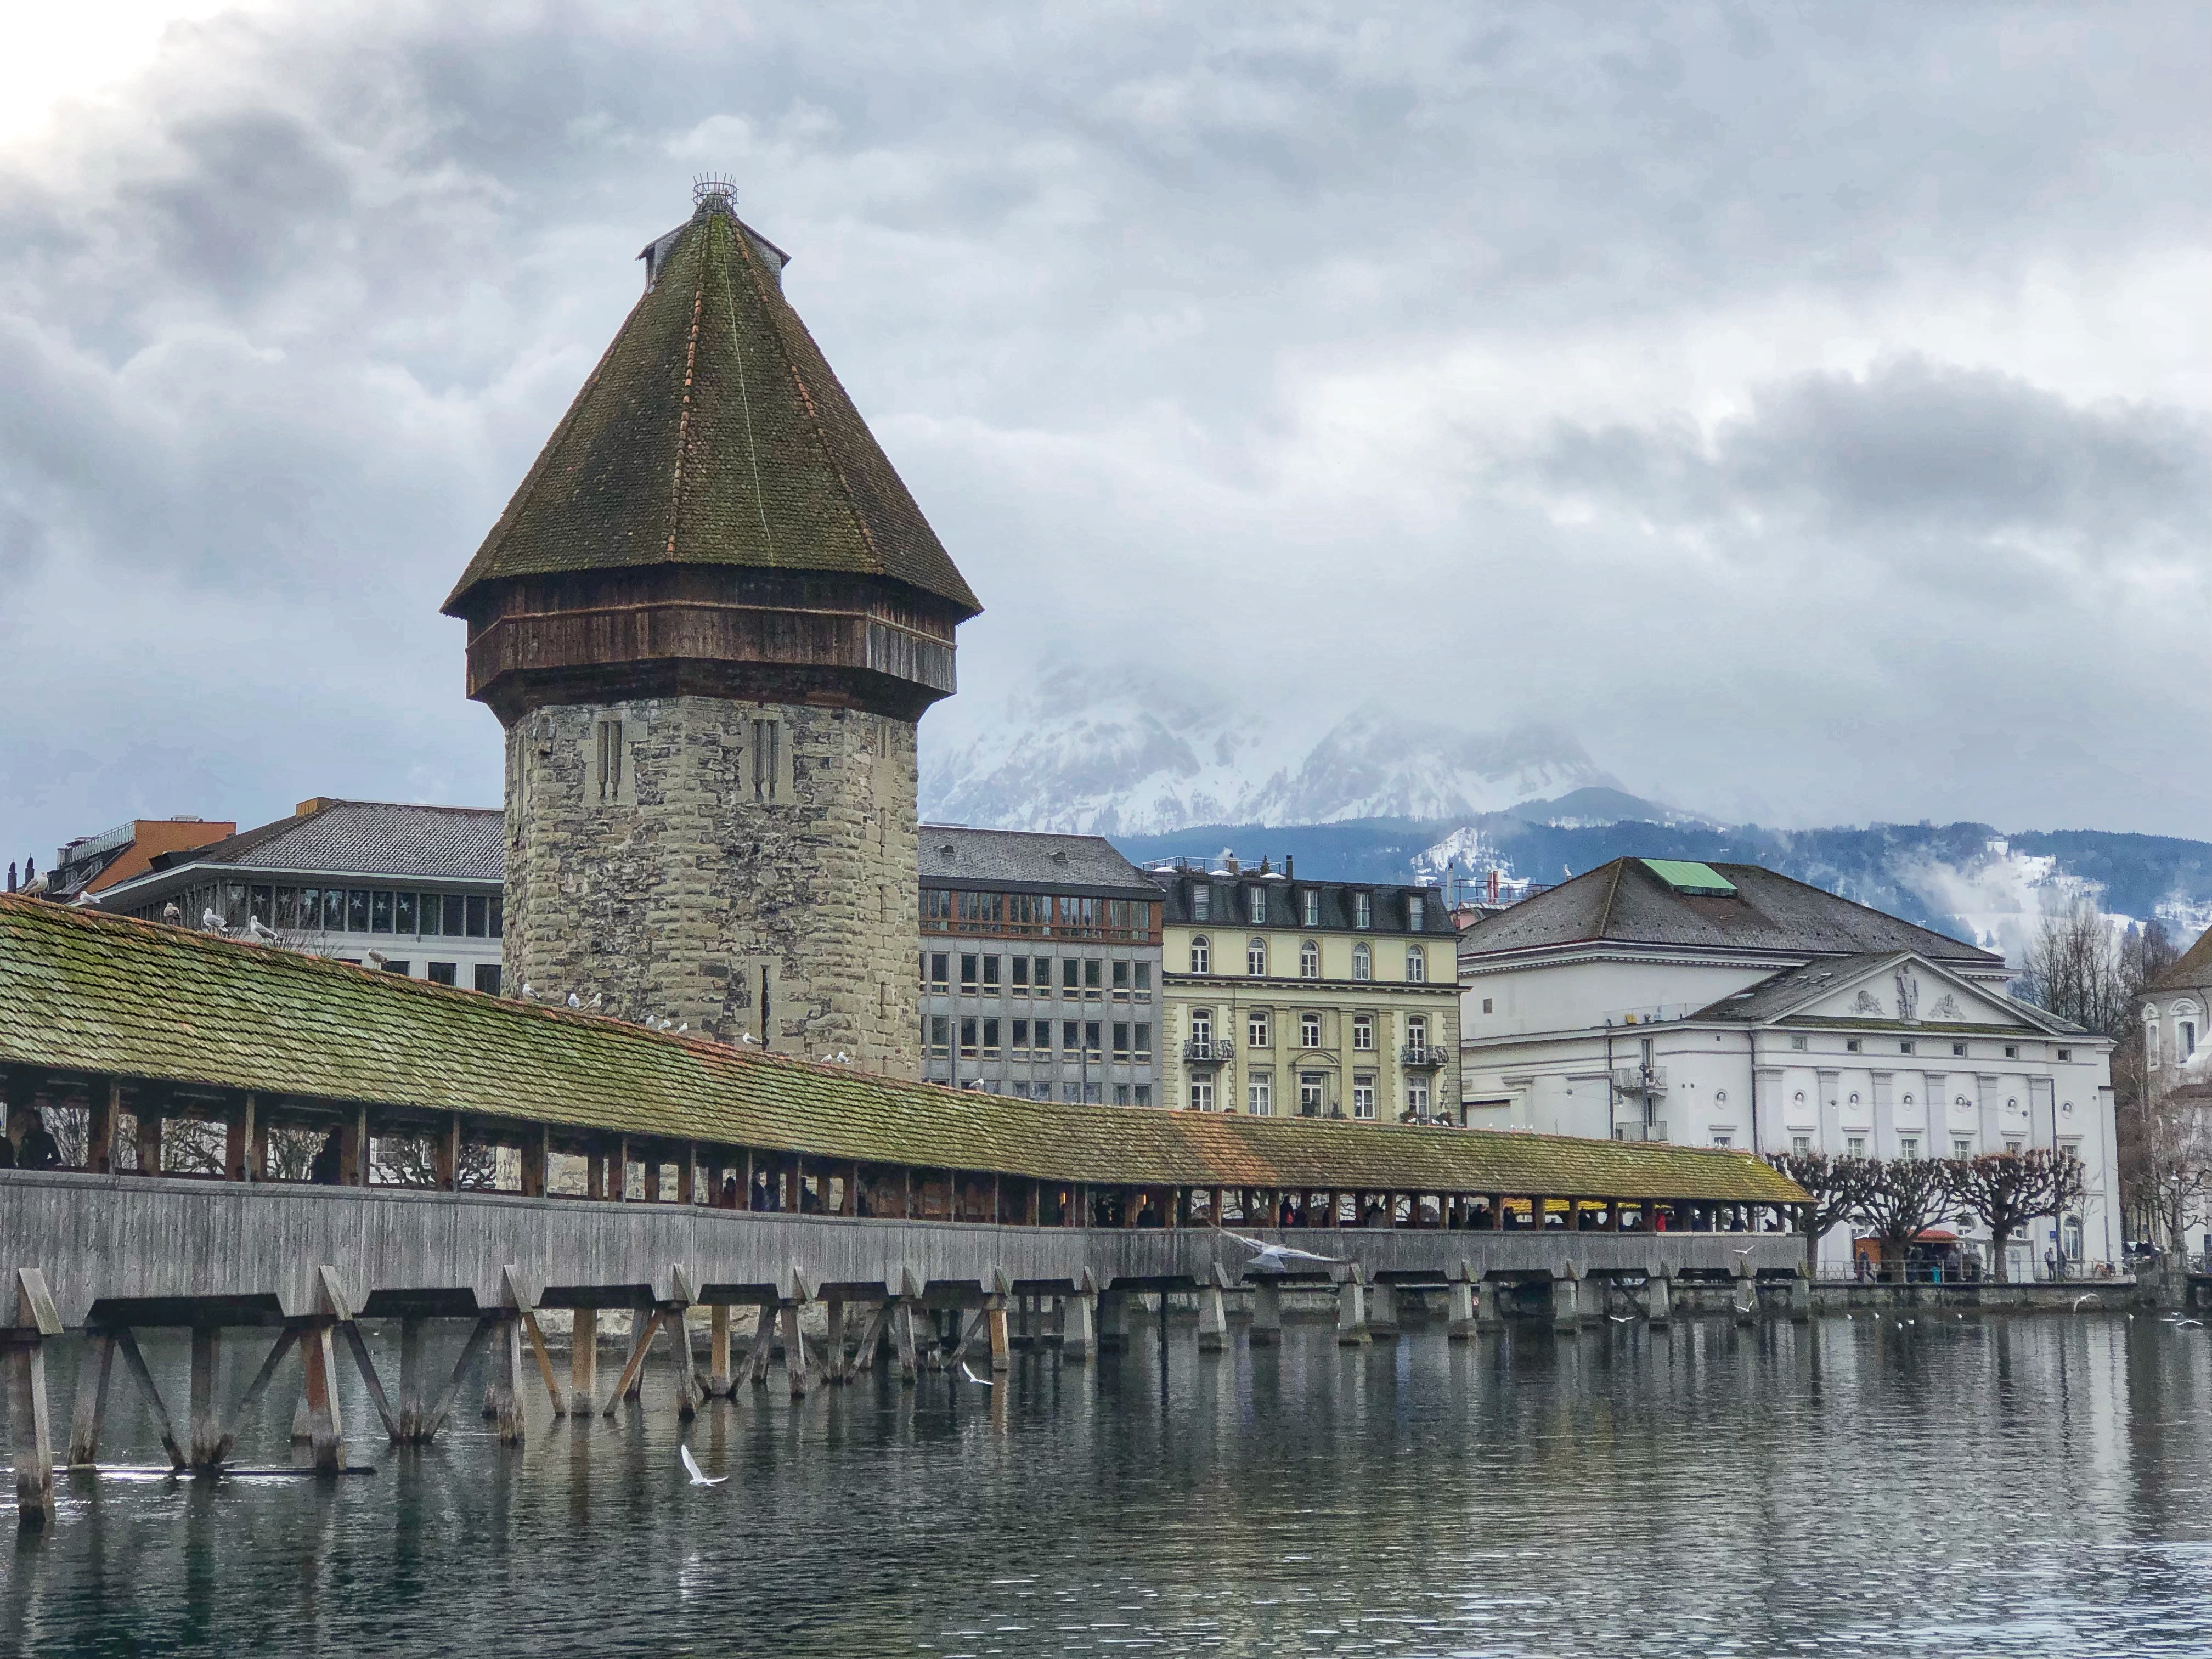 The Kapellbrücke, a wooden footbridge in Lucerne, Switzerland, with snowcapped mountains in the background.